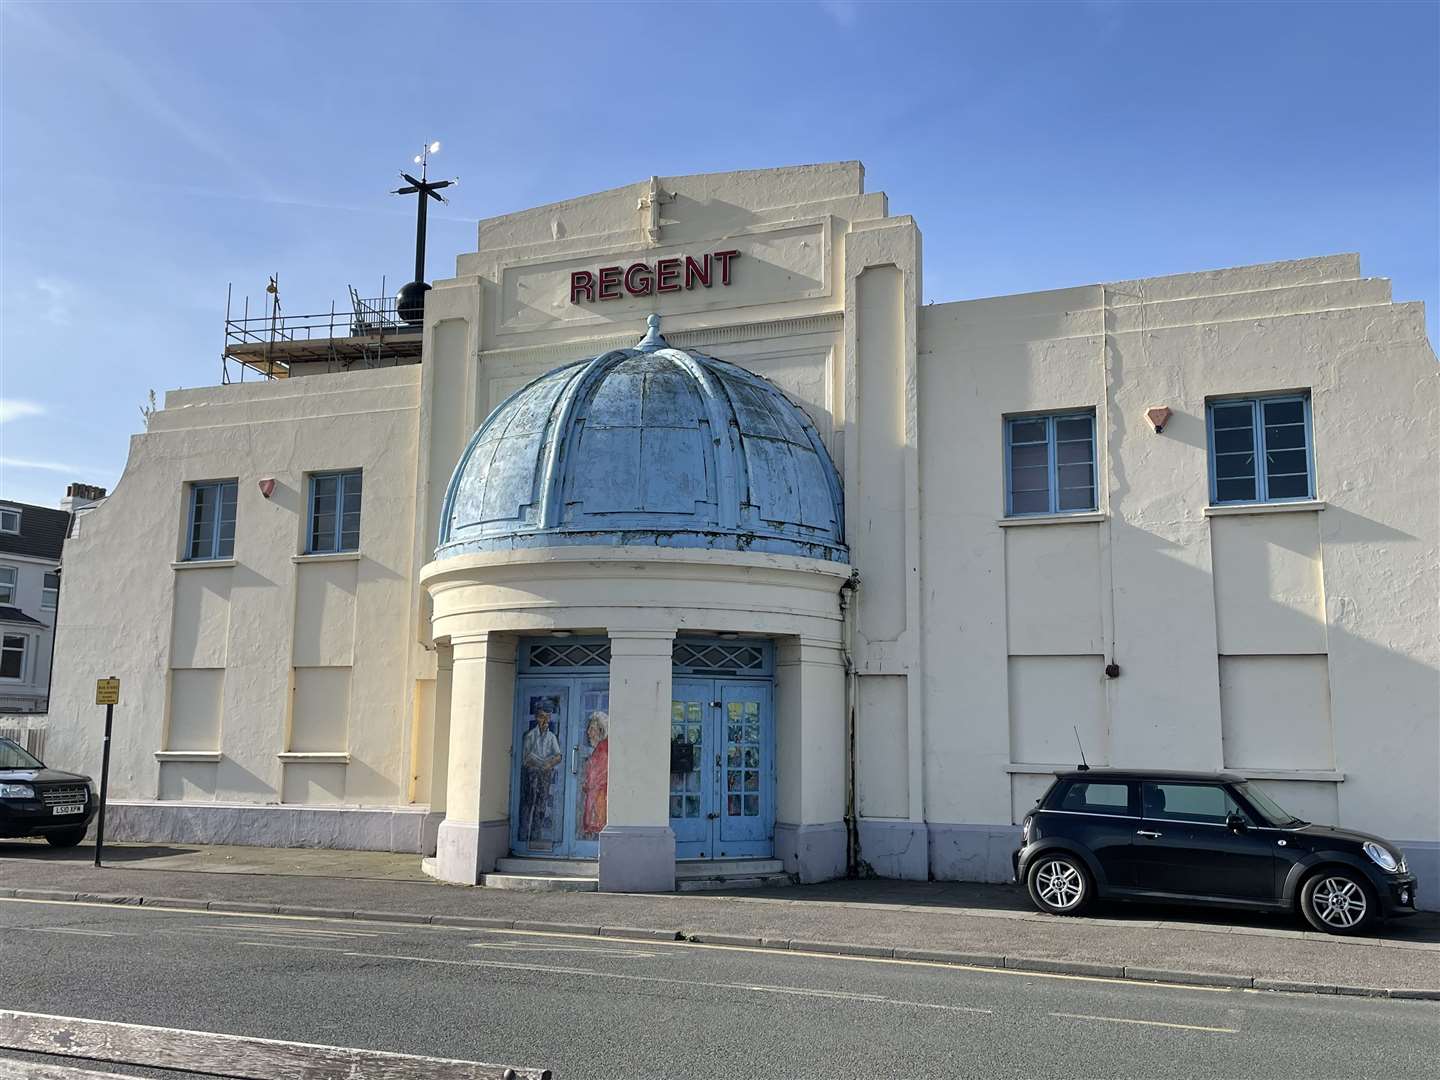 Planning permission was granted in July 2019 for the The Regent to be converted into a cinema